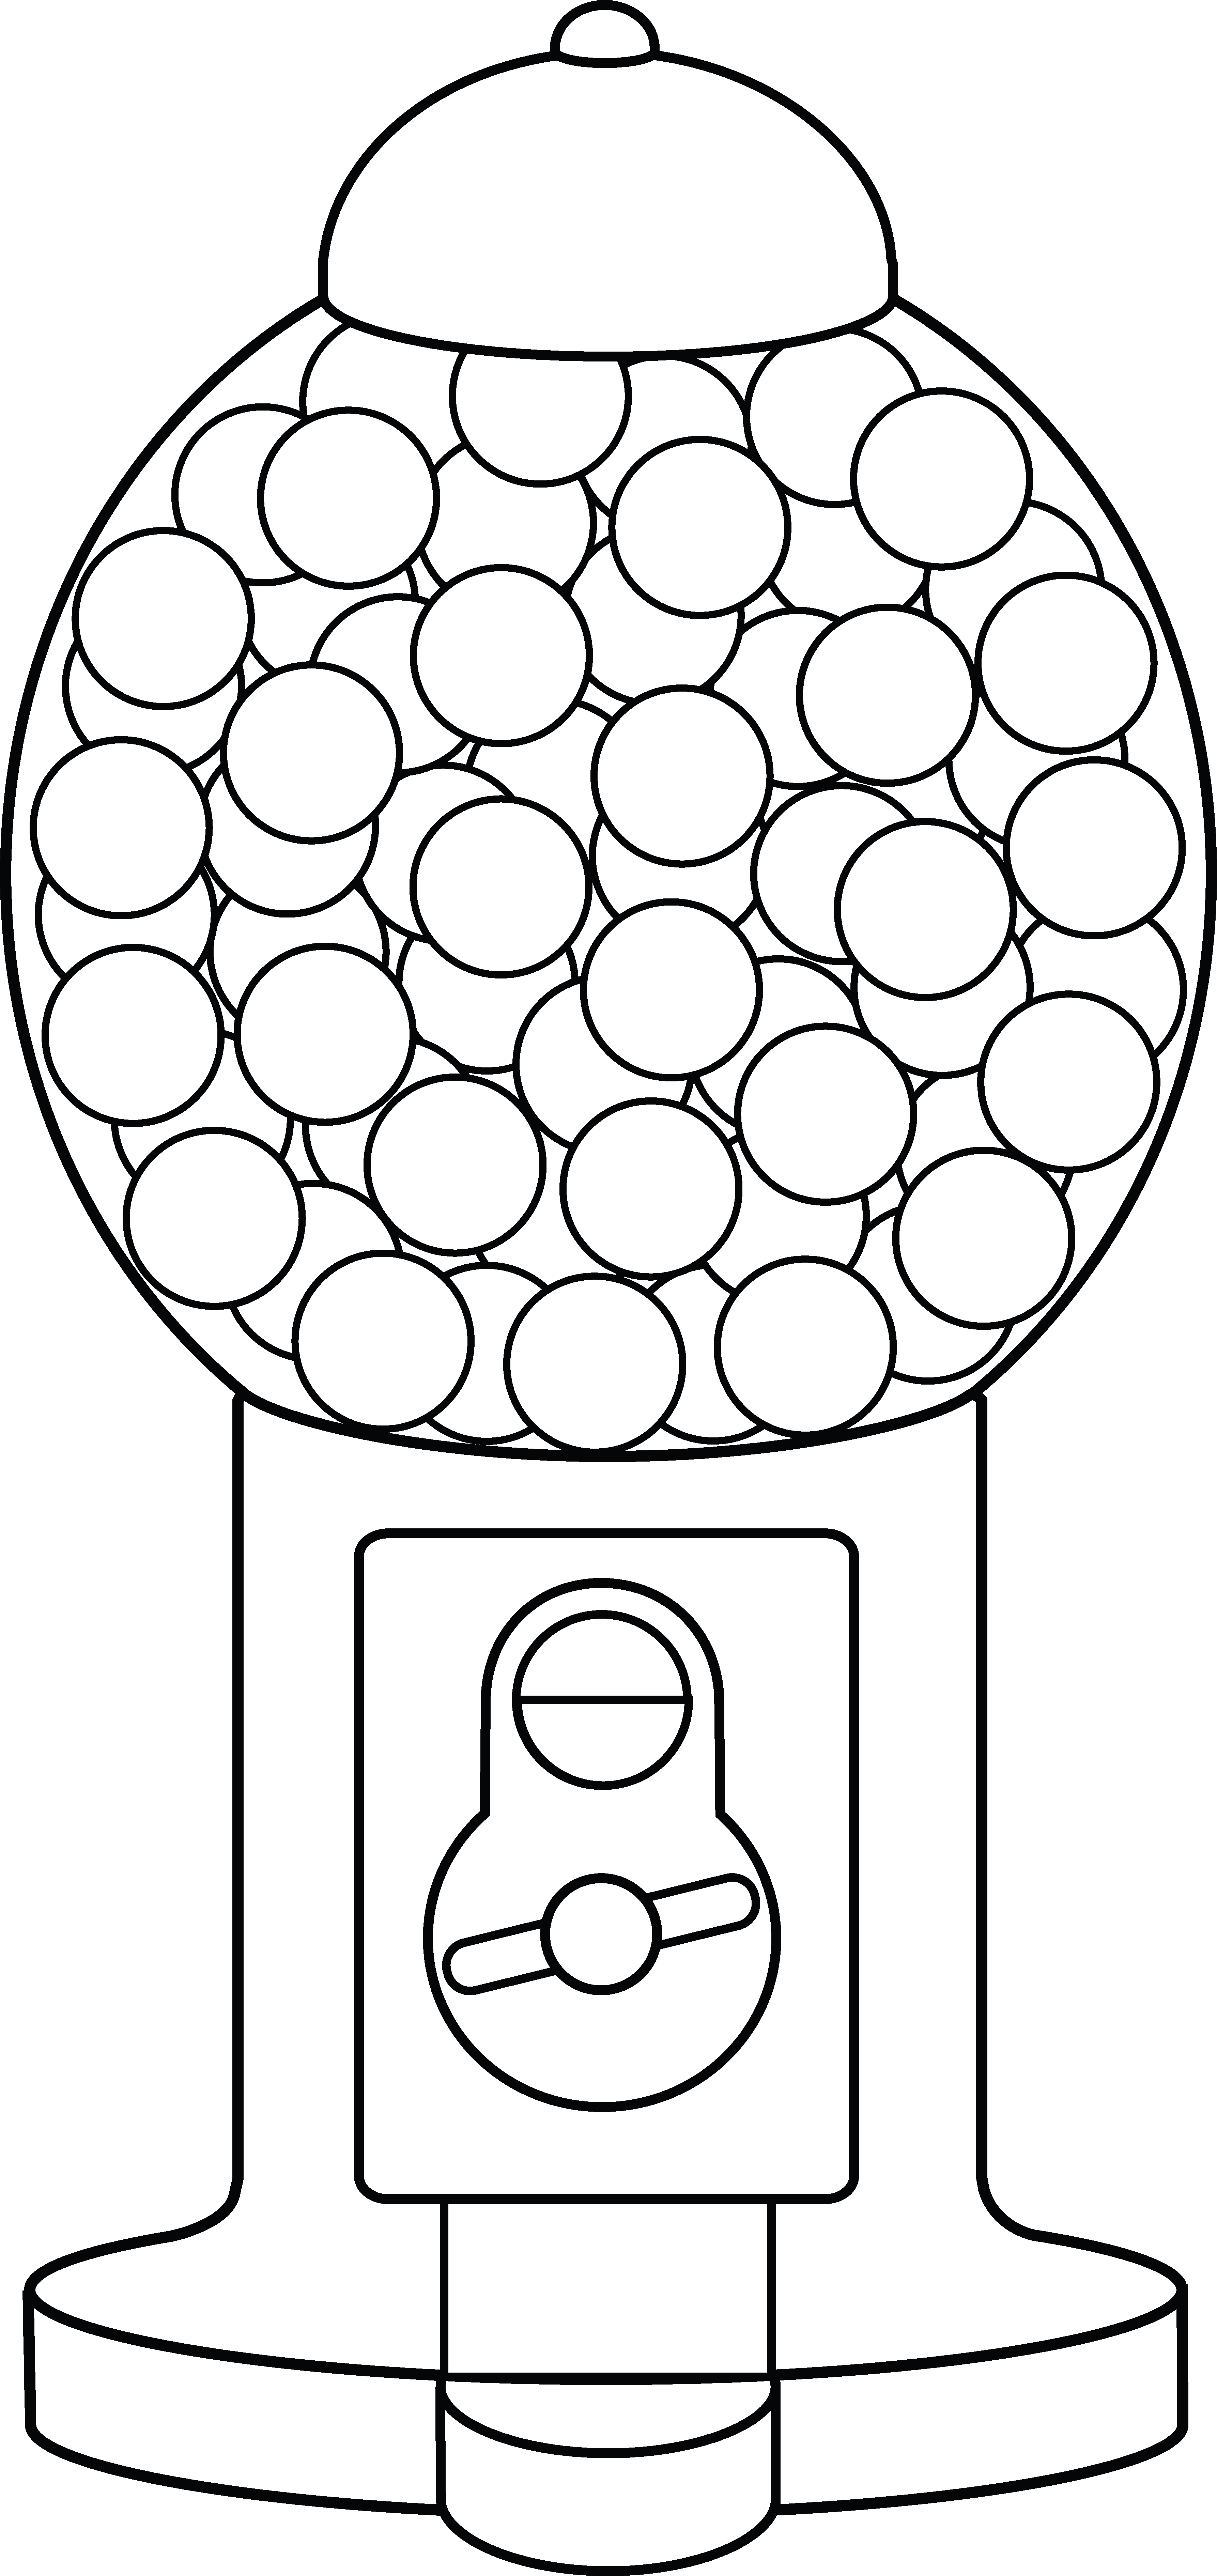 Gumball Machine Coloring Page - Free Clip Art | Candy coloring pages, Coloring  pages, Coloring books